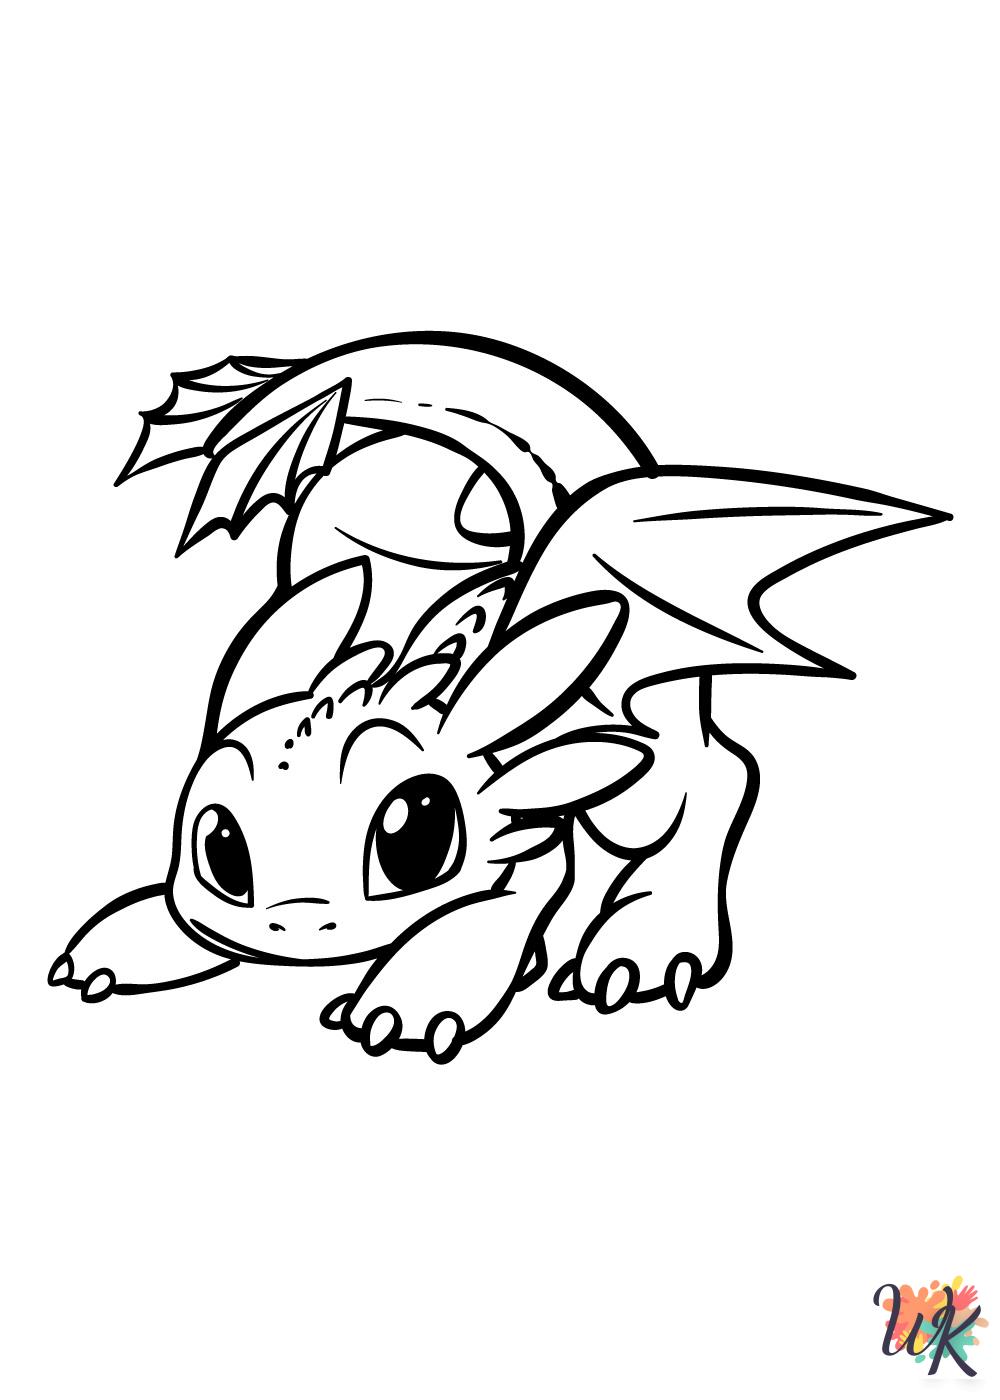 detailed How To Train Your Dragon coloring pages